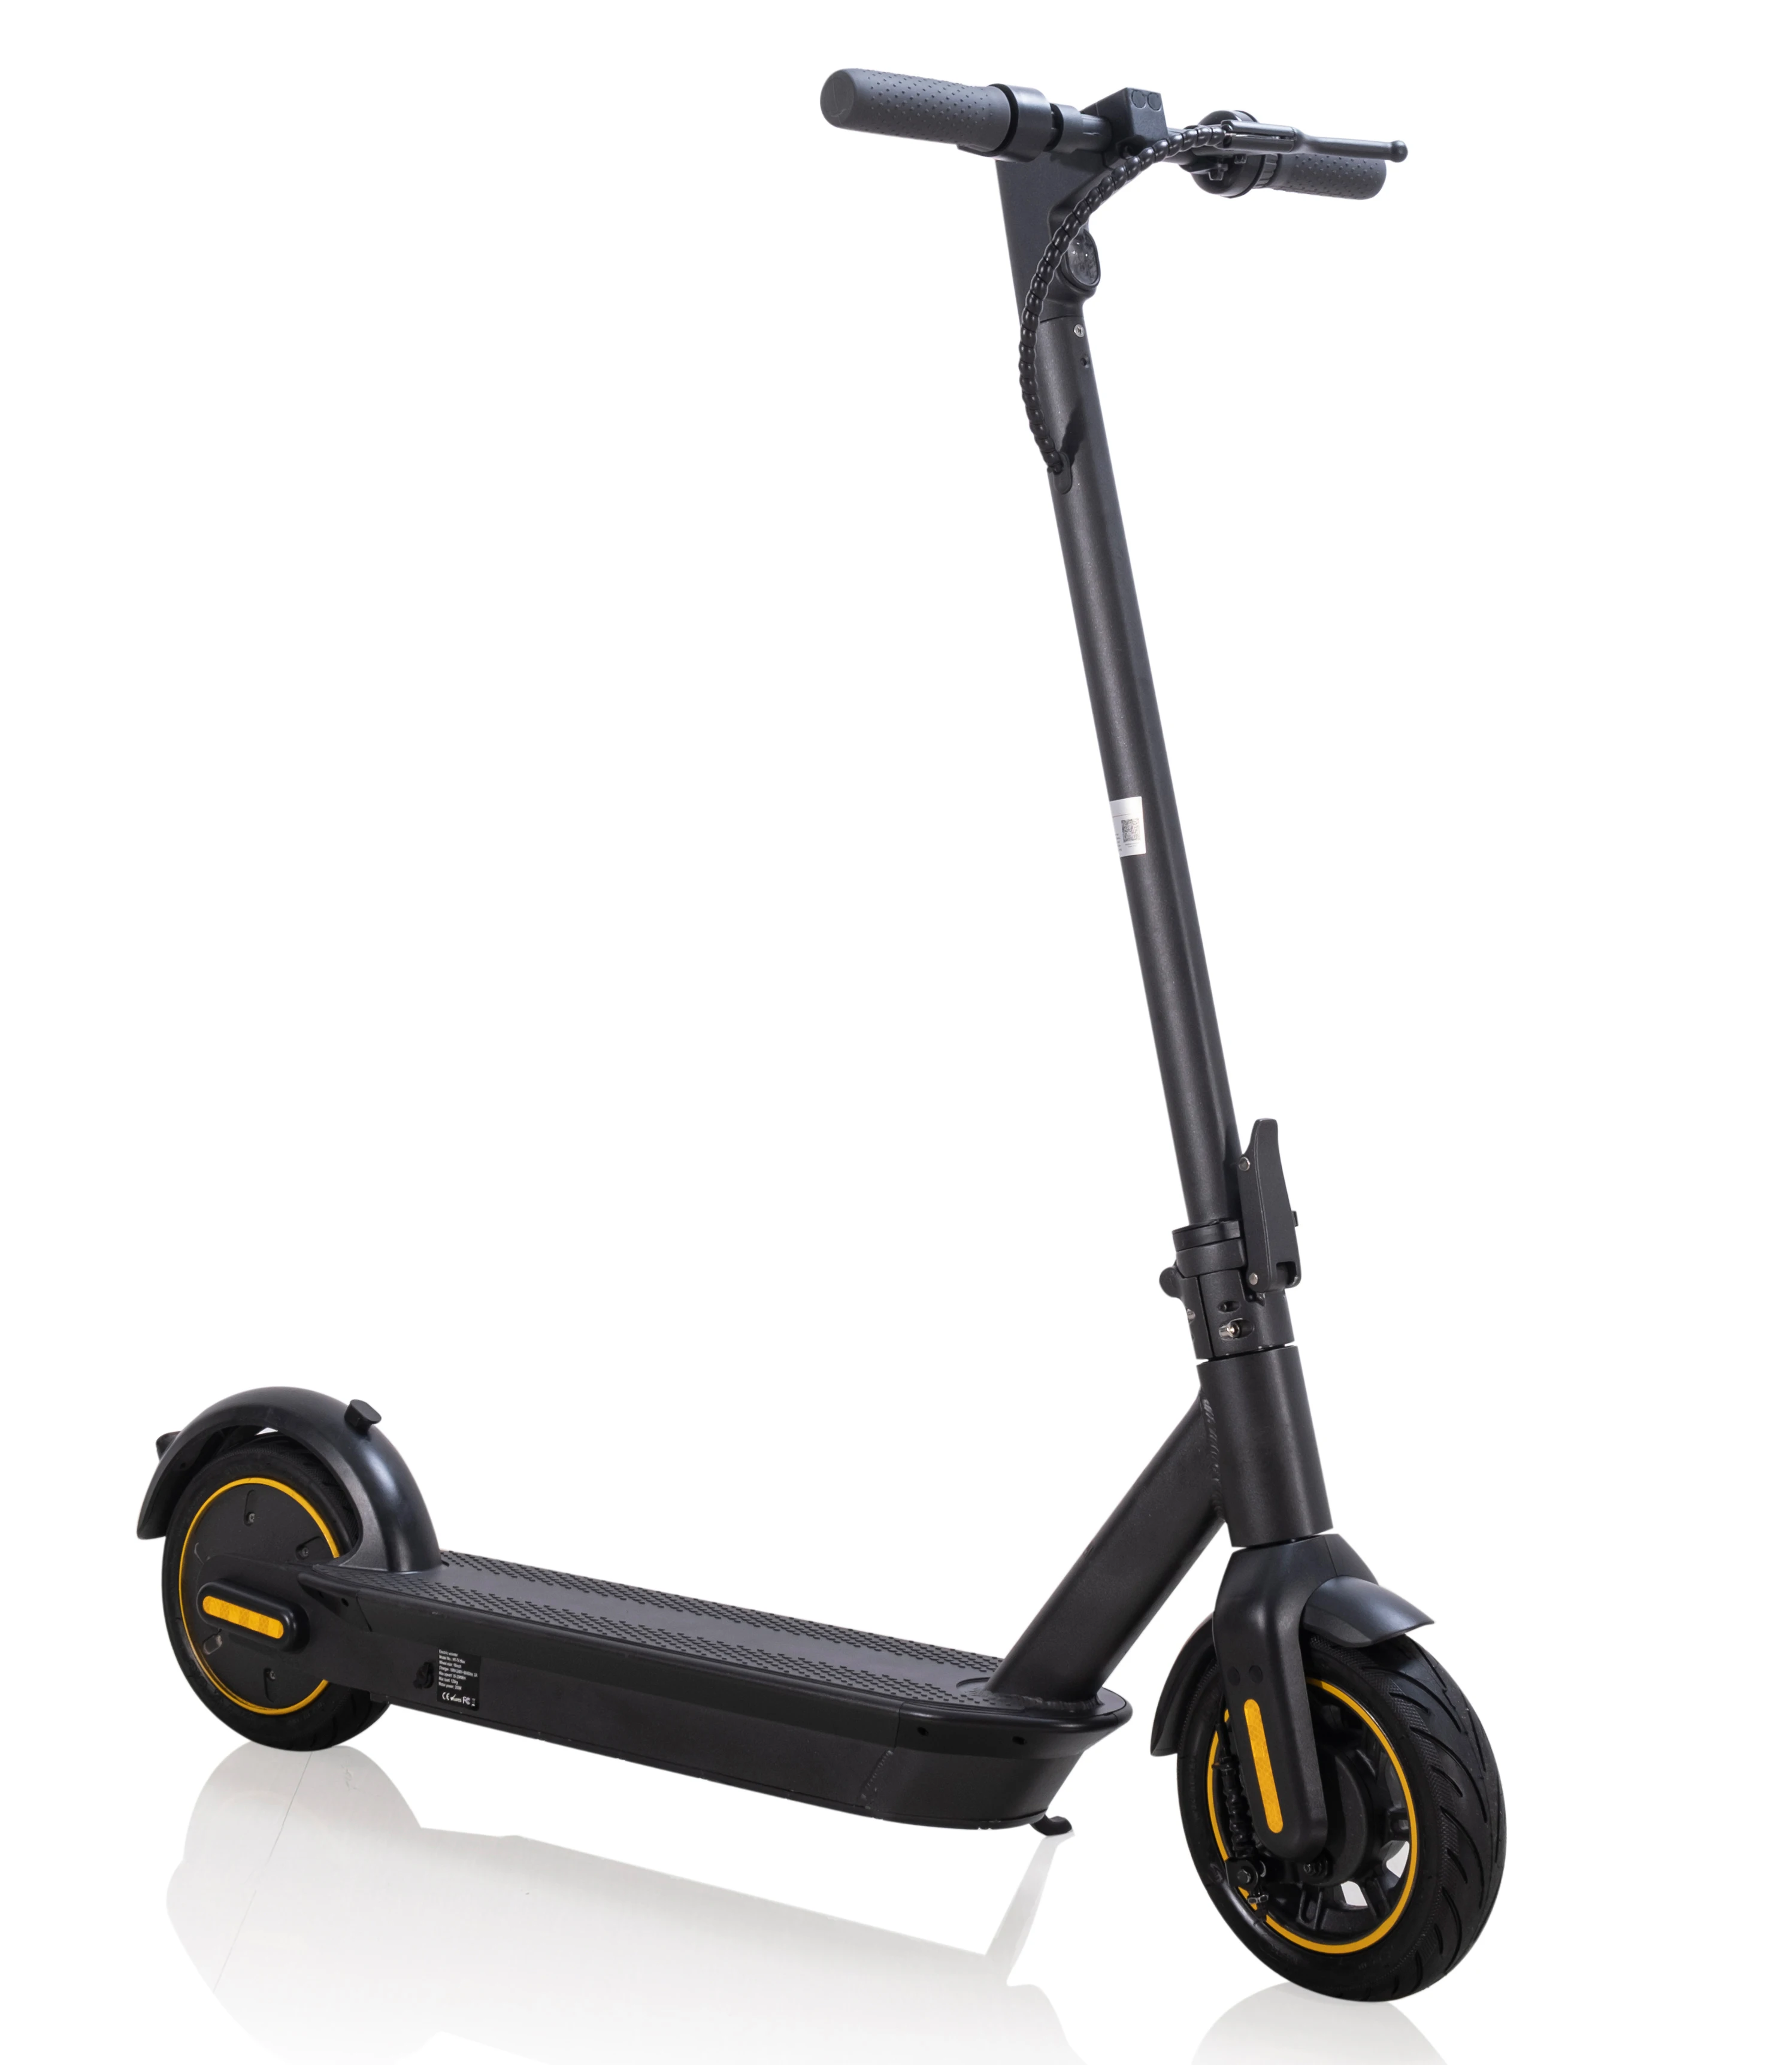 

2020 amazon hottest US Europe Warehouse 350 w 10 Inch Foldable Scooter Electric Similar to MAX G30, Black